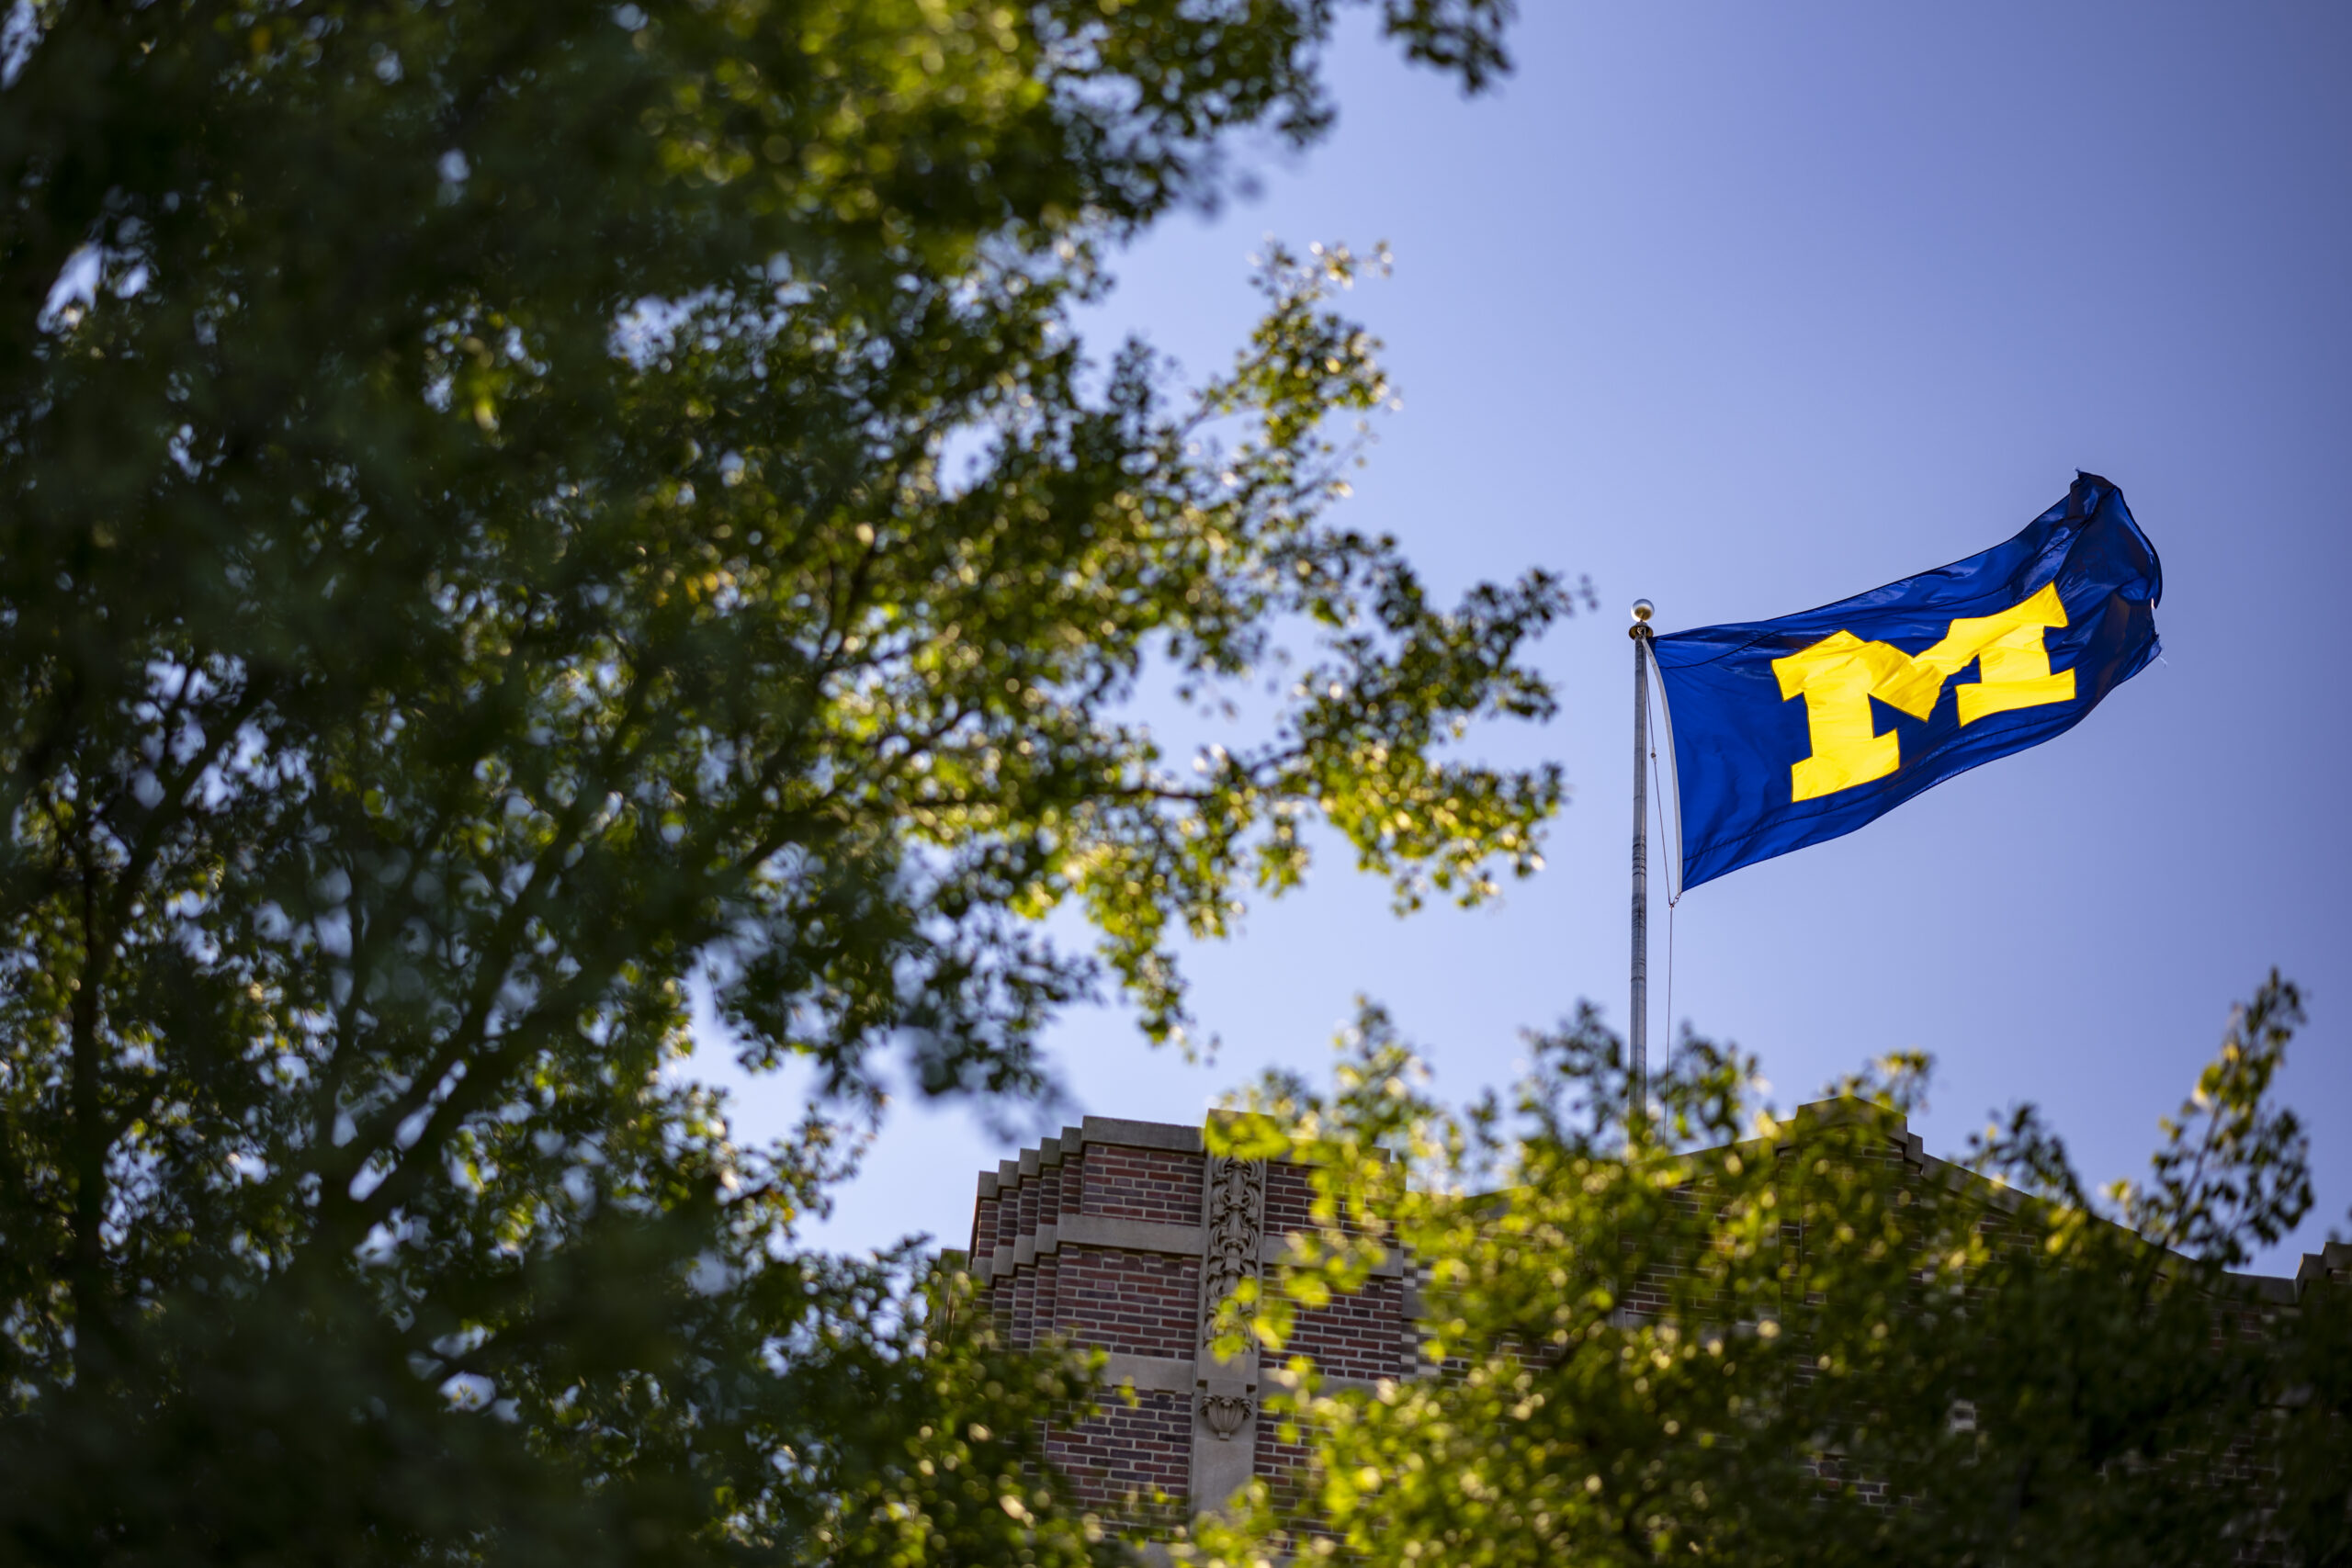 University of Michigan flag with blue background and yellow M flys on outdoor flagpole